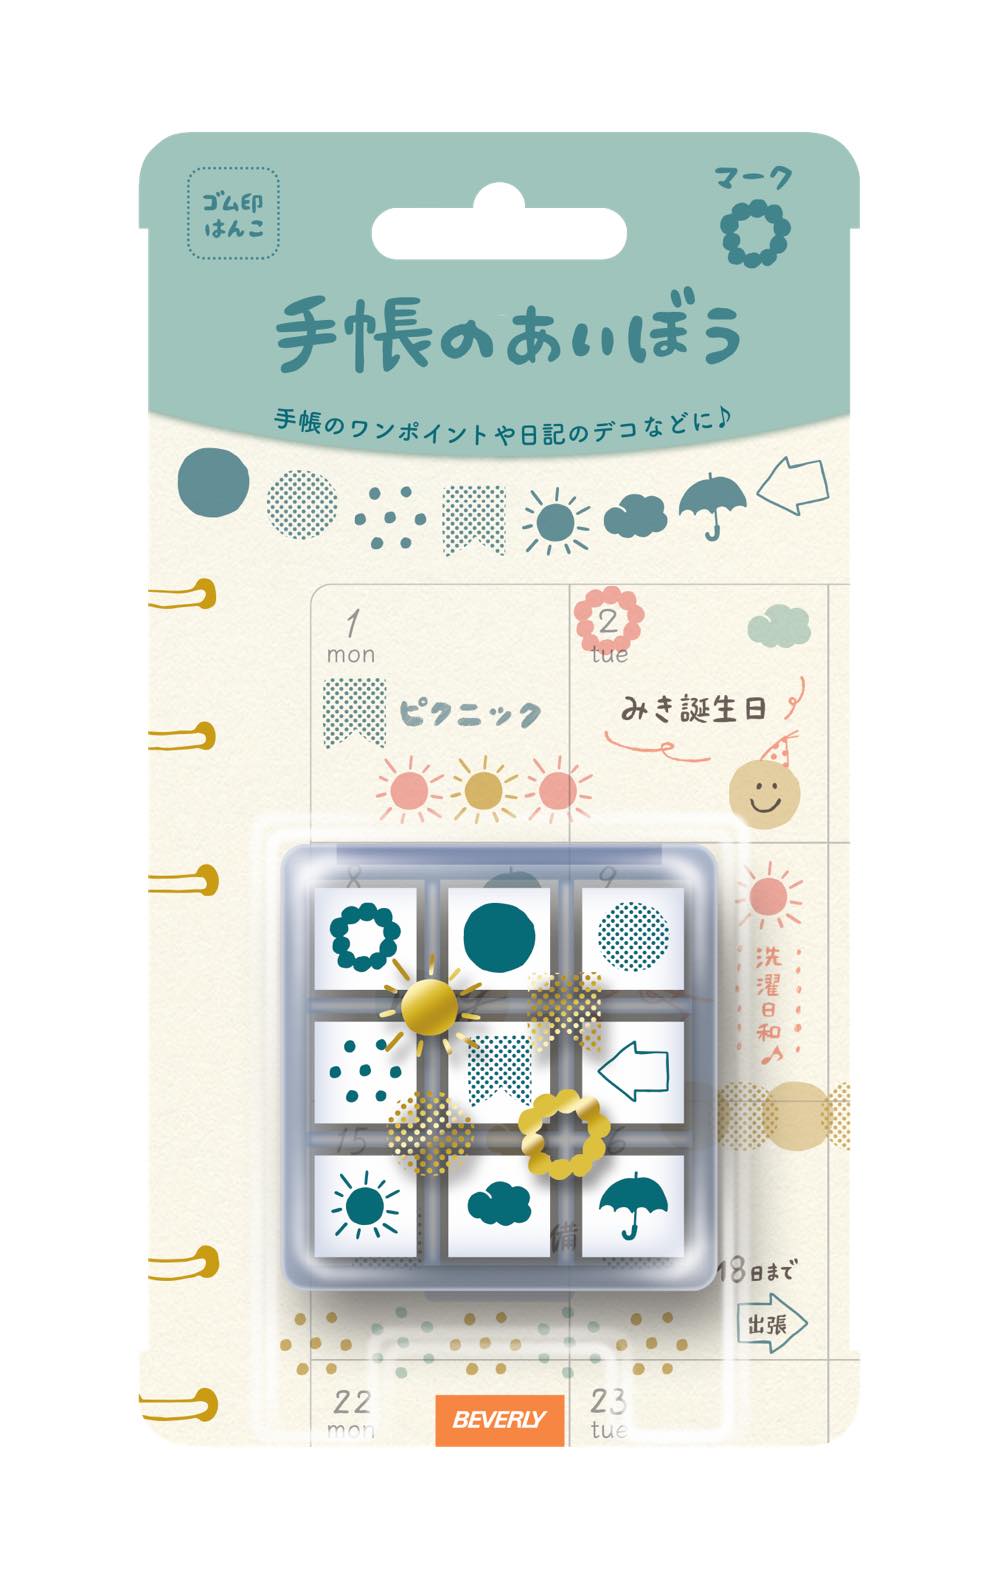 BEVERLY Notebook Aibo Stamp Set Set of wooden rubberstamps to decorate your planners and notebooks with. Set has 9 rubberstamps in a plastic case.